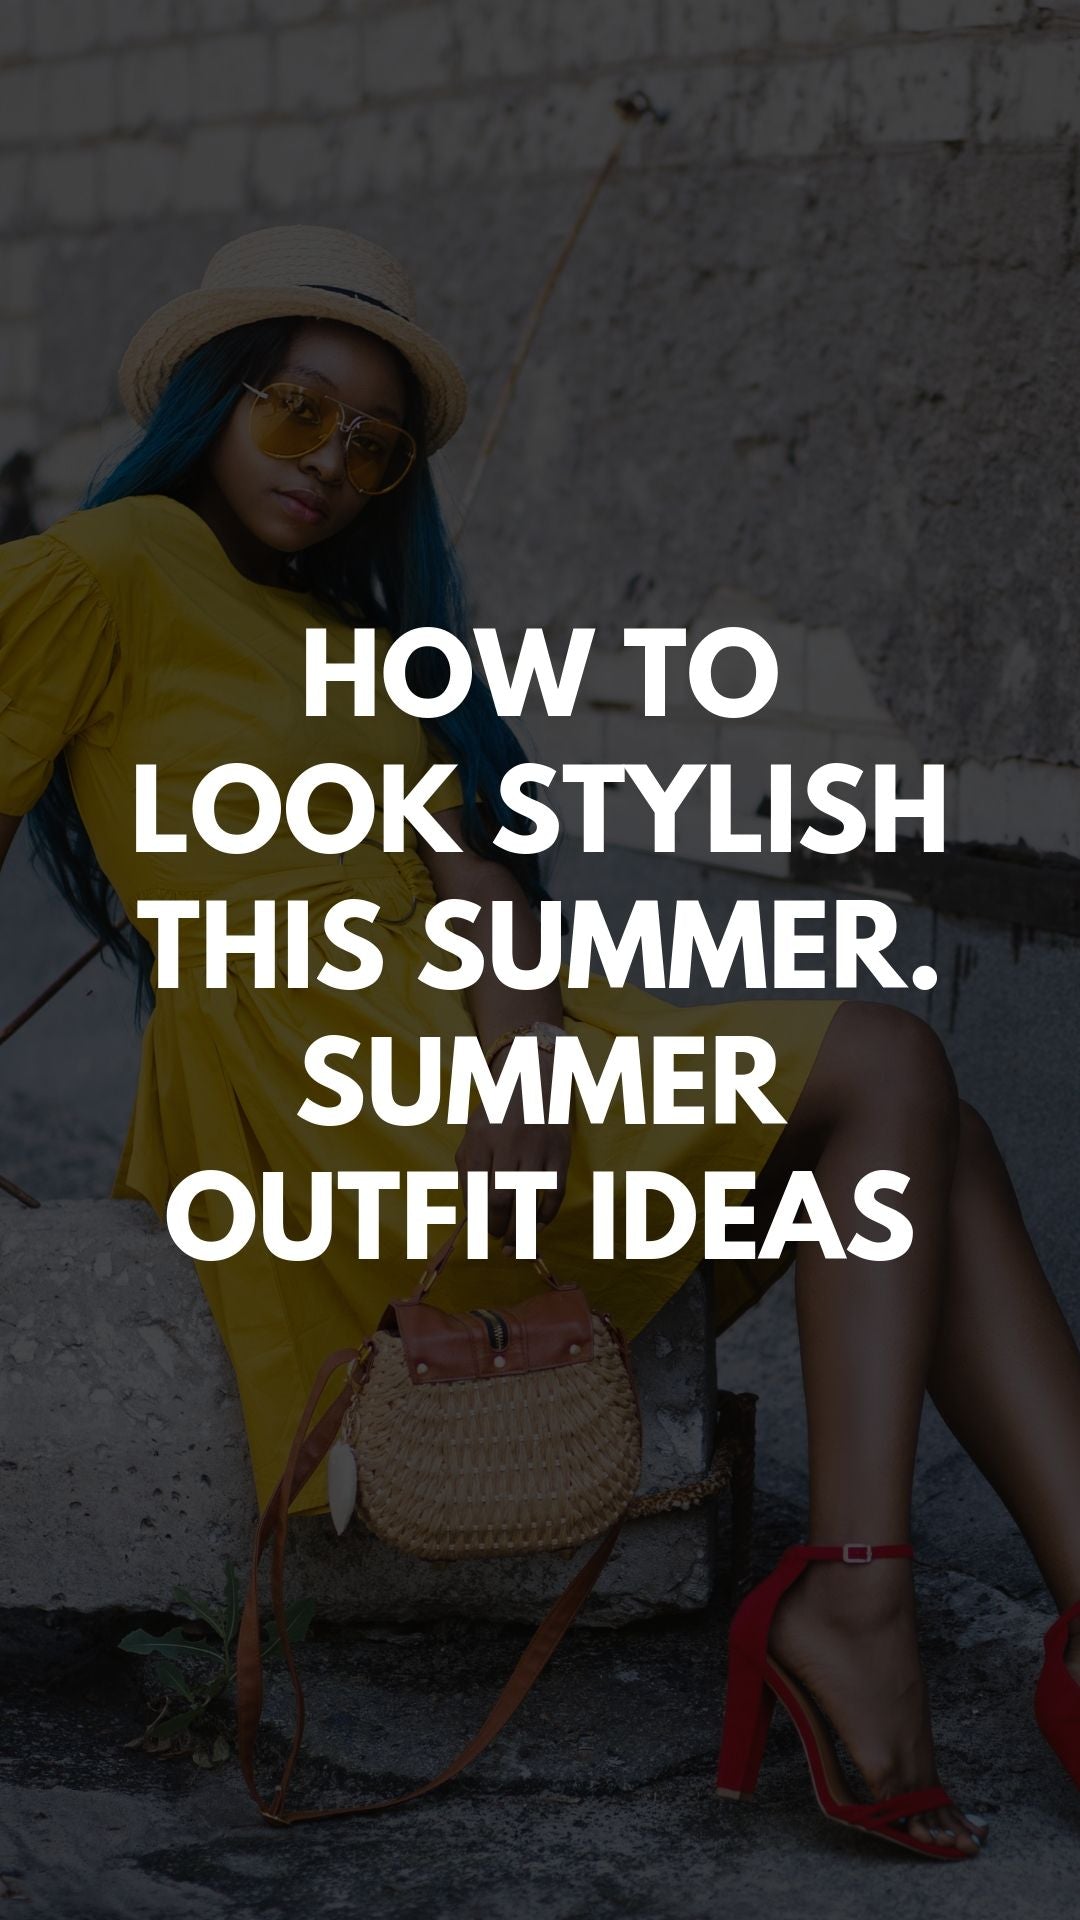 How To Look Stylish This Summer. Summer Outfit Ideas